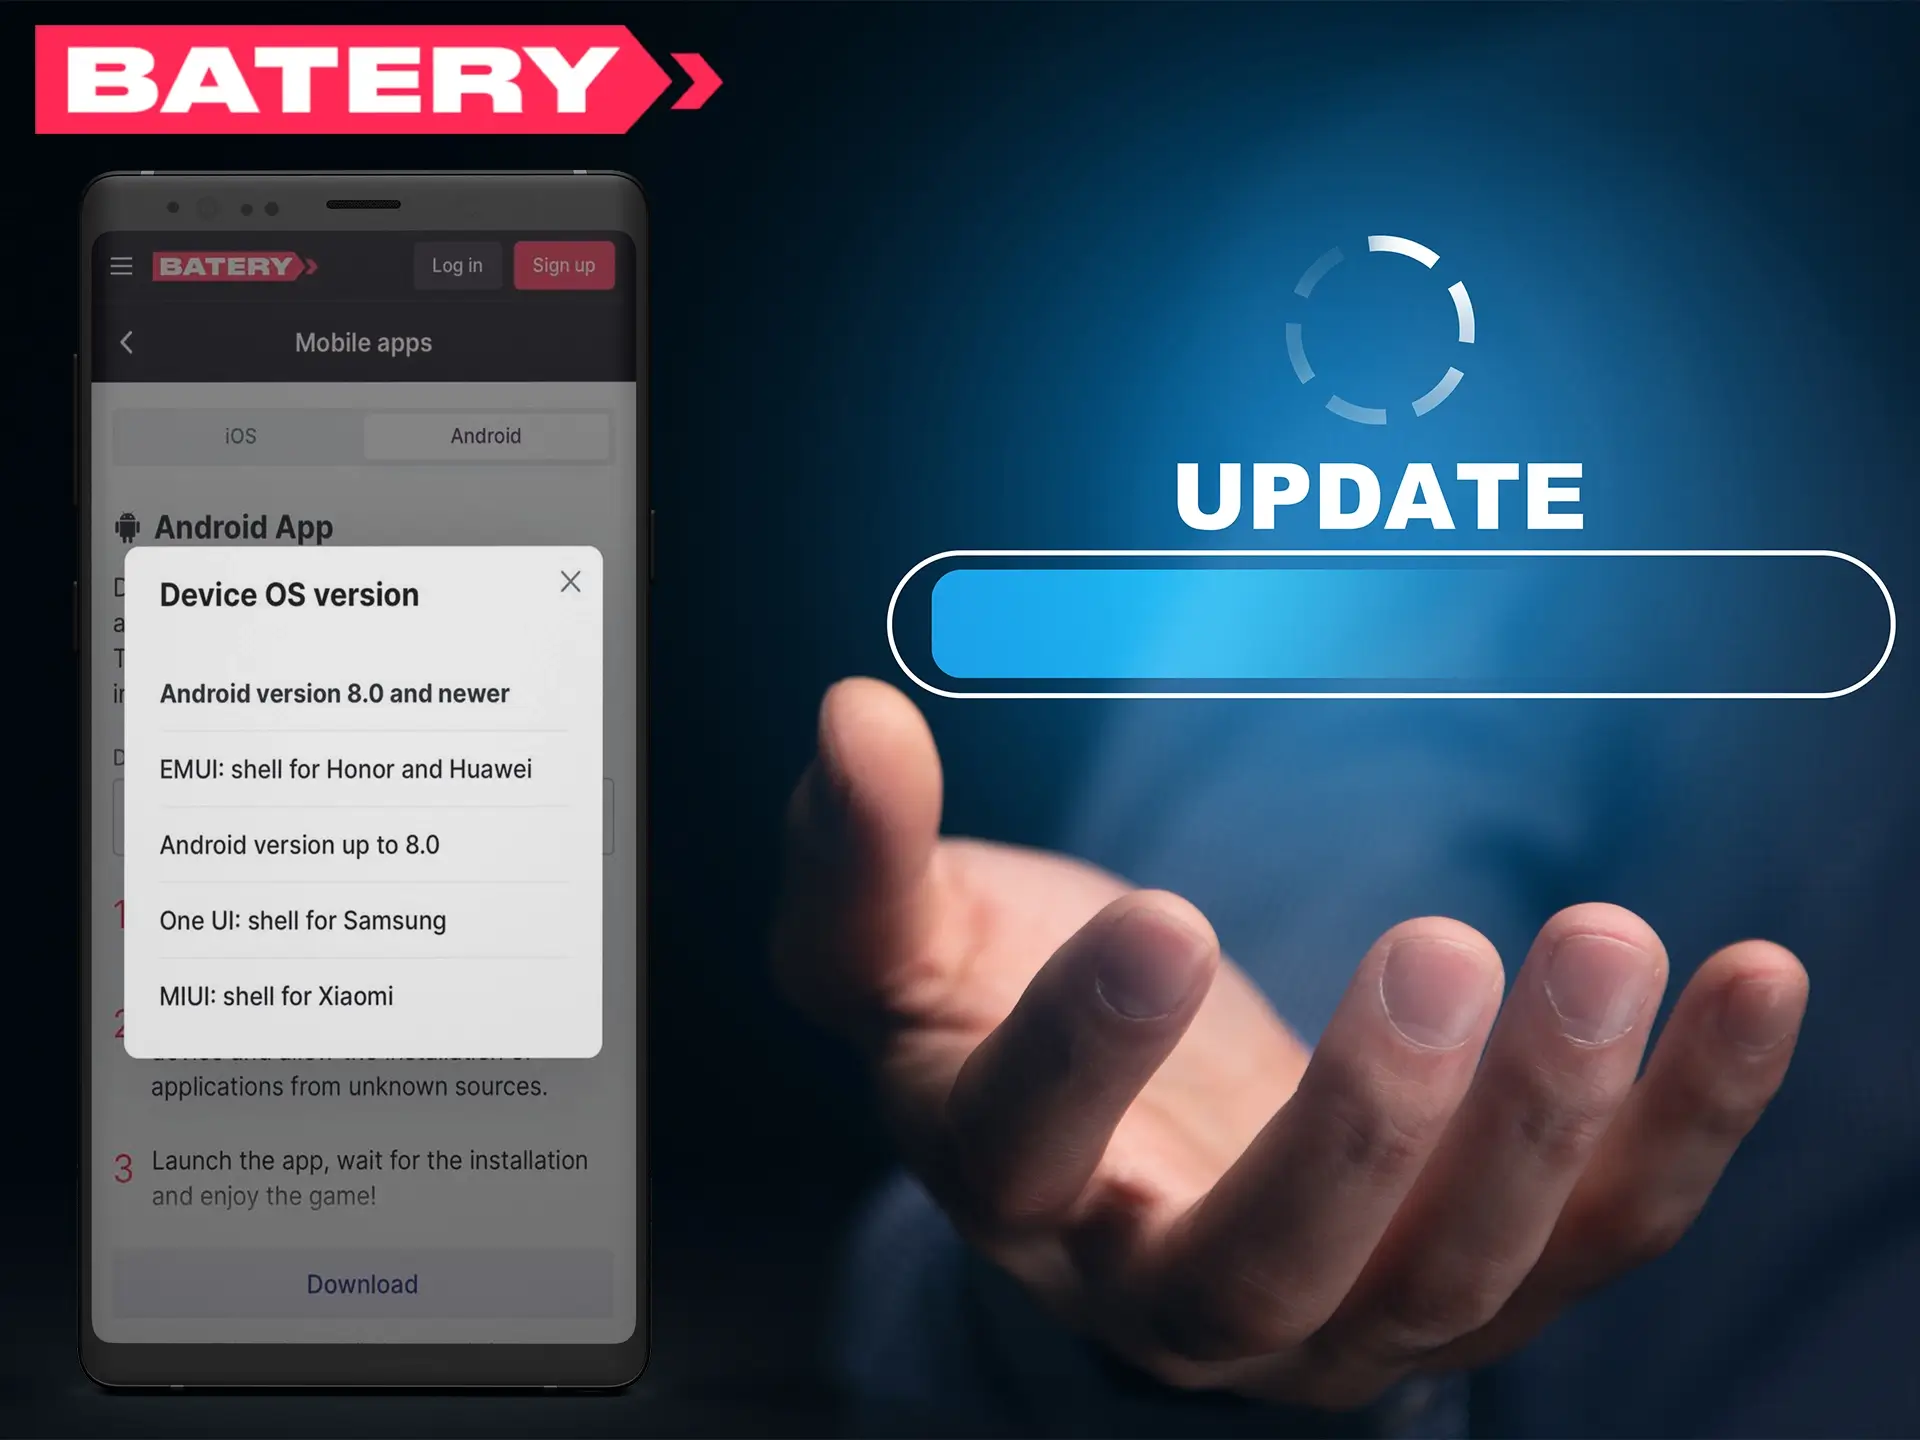 Batery regularly updates its mobile product and tries to improve the necessary features.